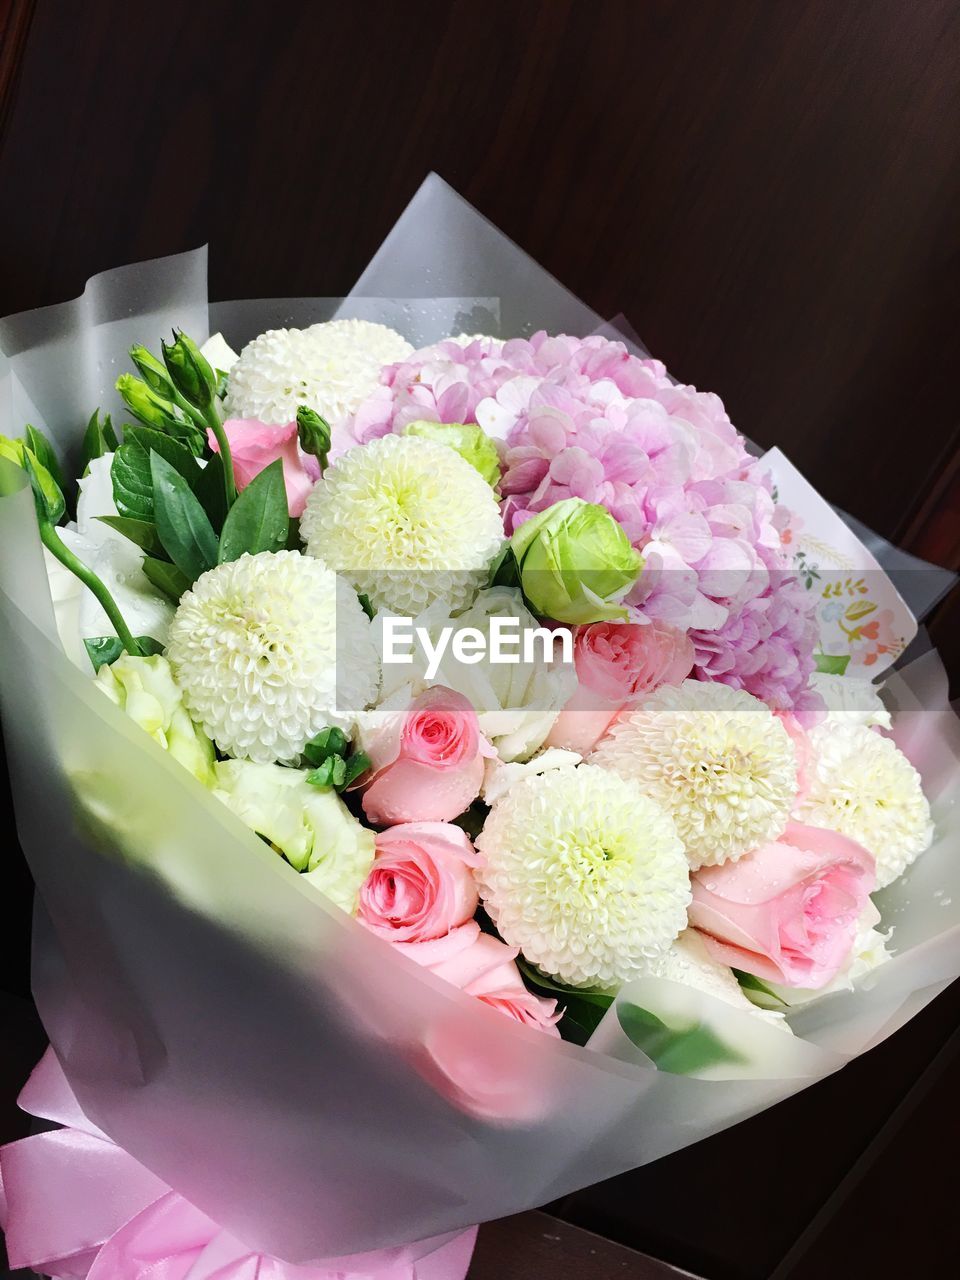 CLOSE-UP VIEW OF BOUQUET